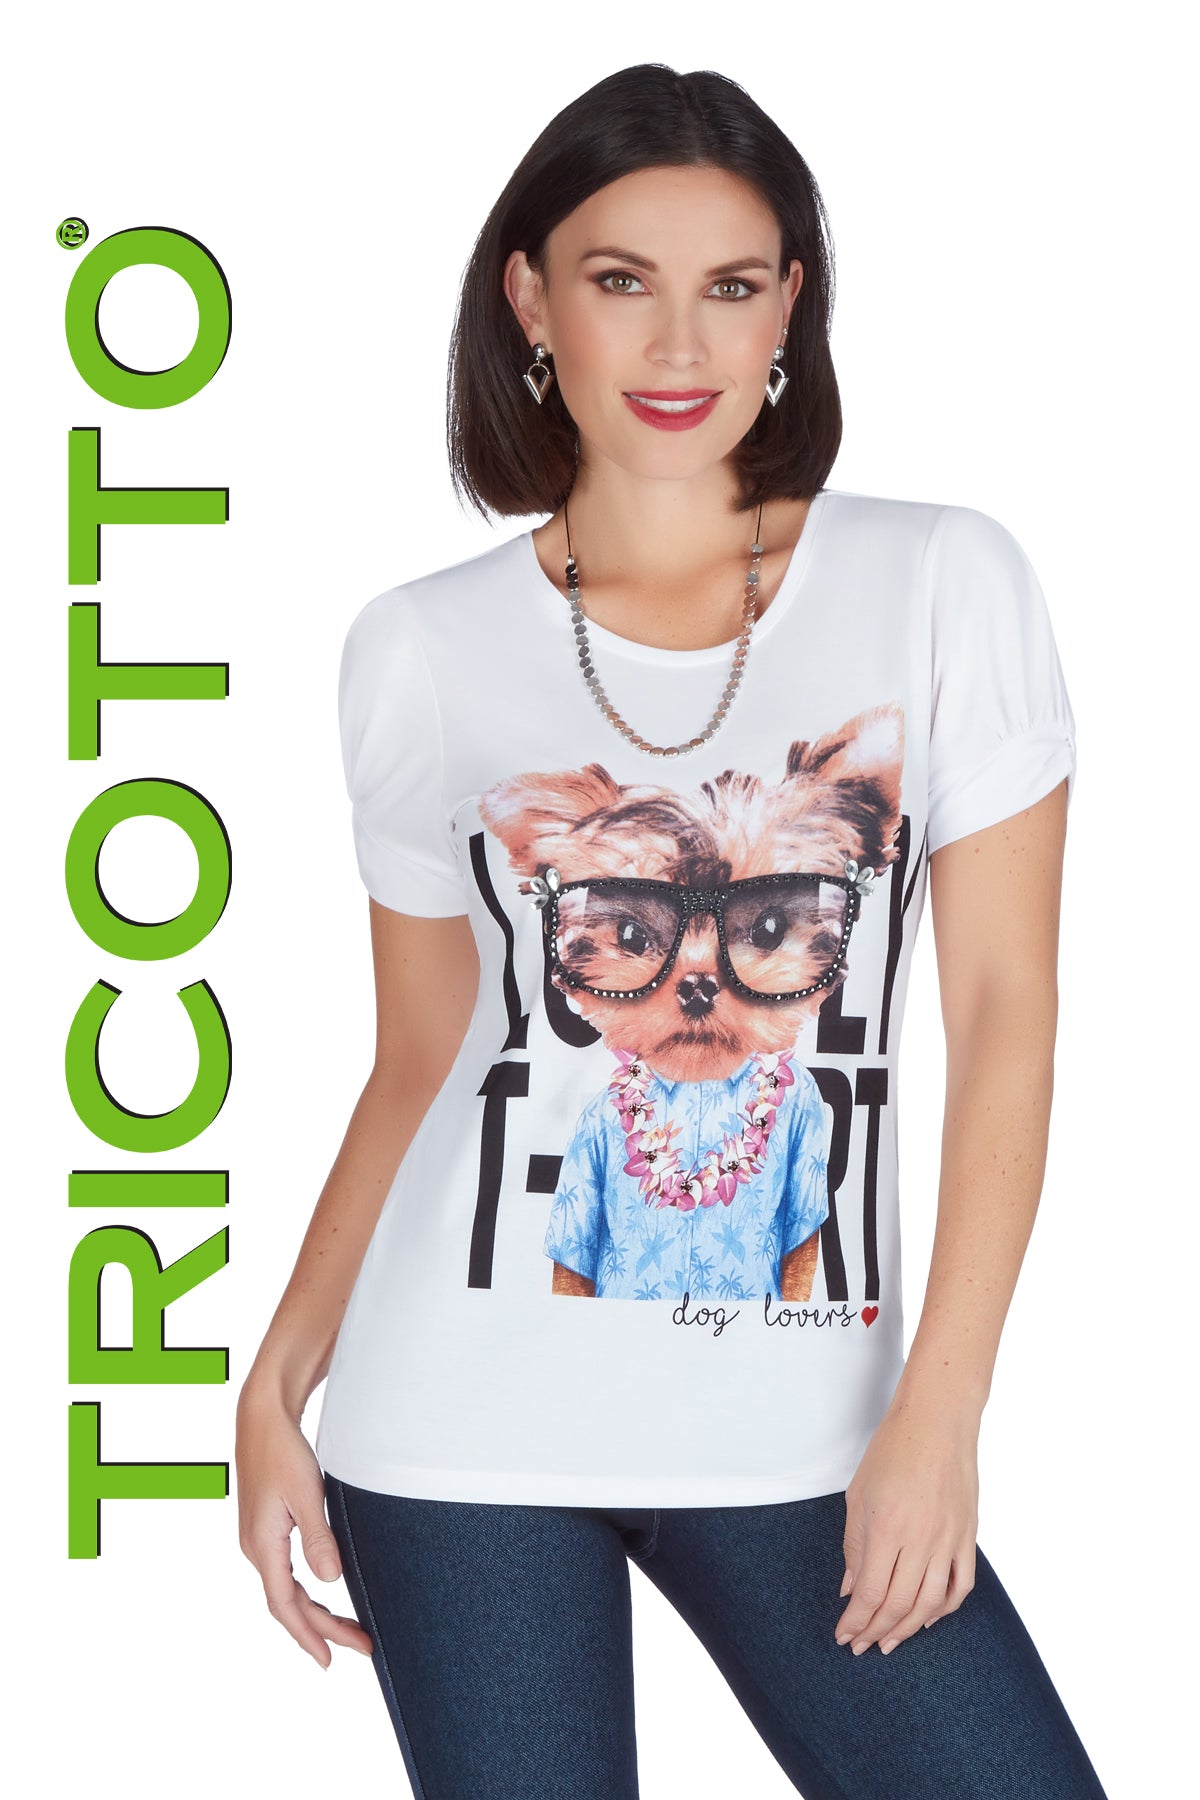 Tricotto T-shirts-Tricotto Dog Lovers T-shirt-Buy Tricotto T-shirts Online-Tricotto Online T-shirt Shop